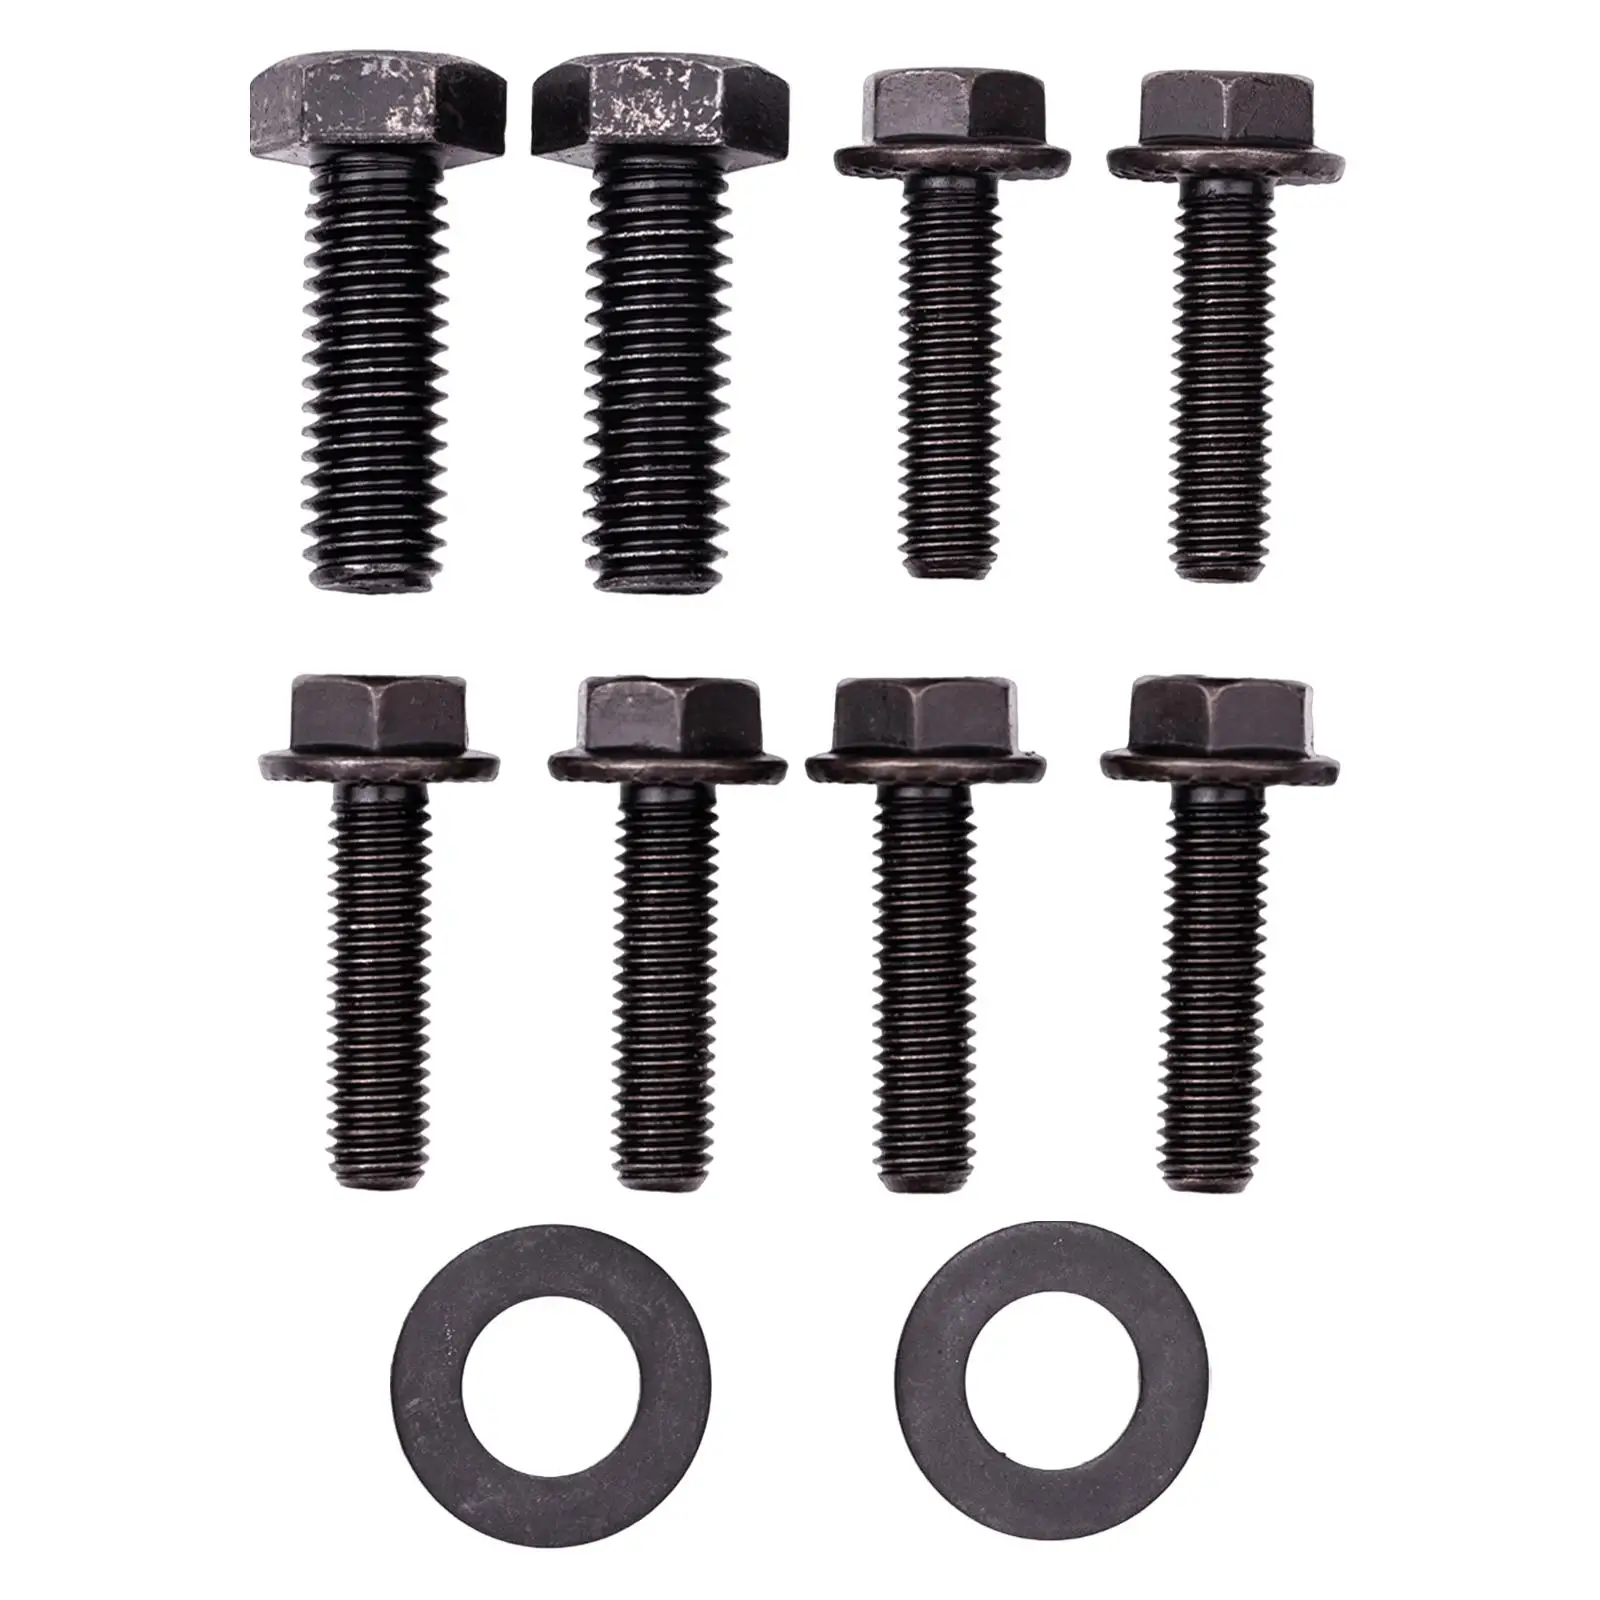 Front Seat Mounting Bolts Attachment Professional Heavy Duty Stable Performance Automotive for Jeep Wrangler TJ 1997-2006